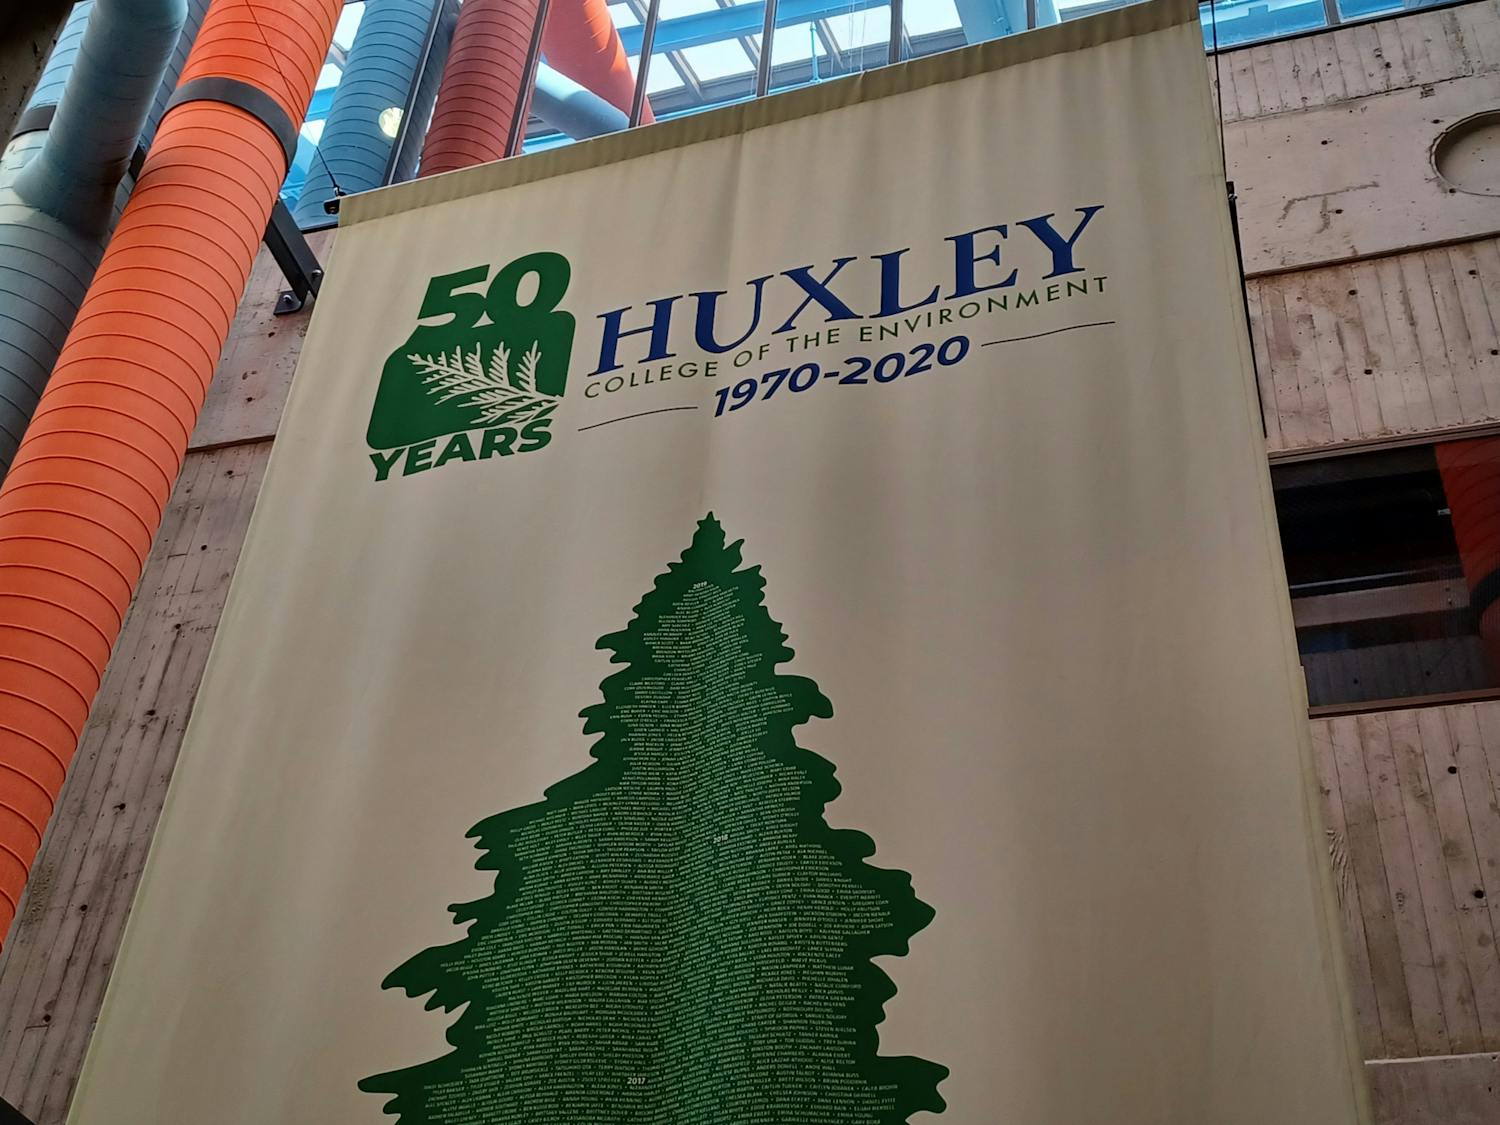 (1) ‘College of the Environment’ remains official name, one year after ‘Huxley’ removal